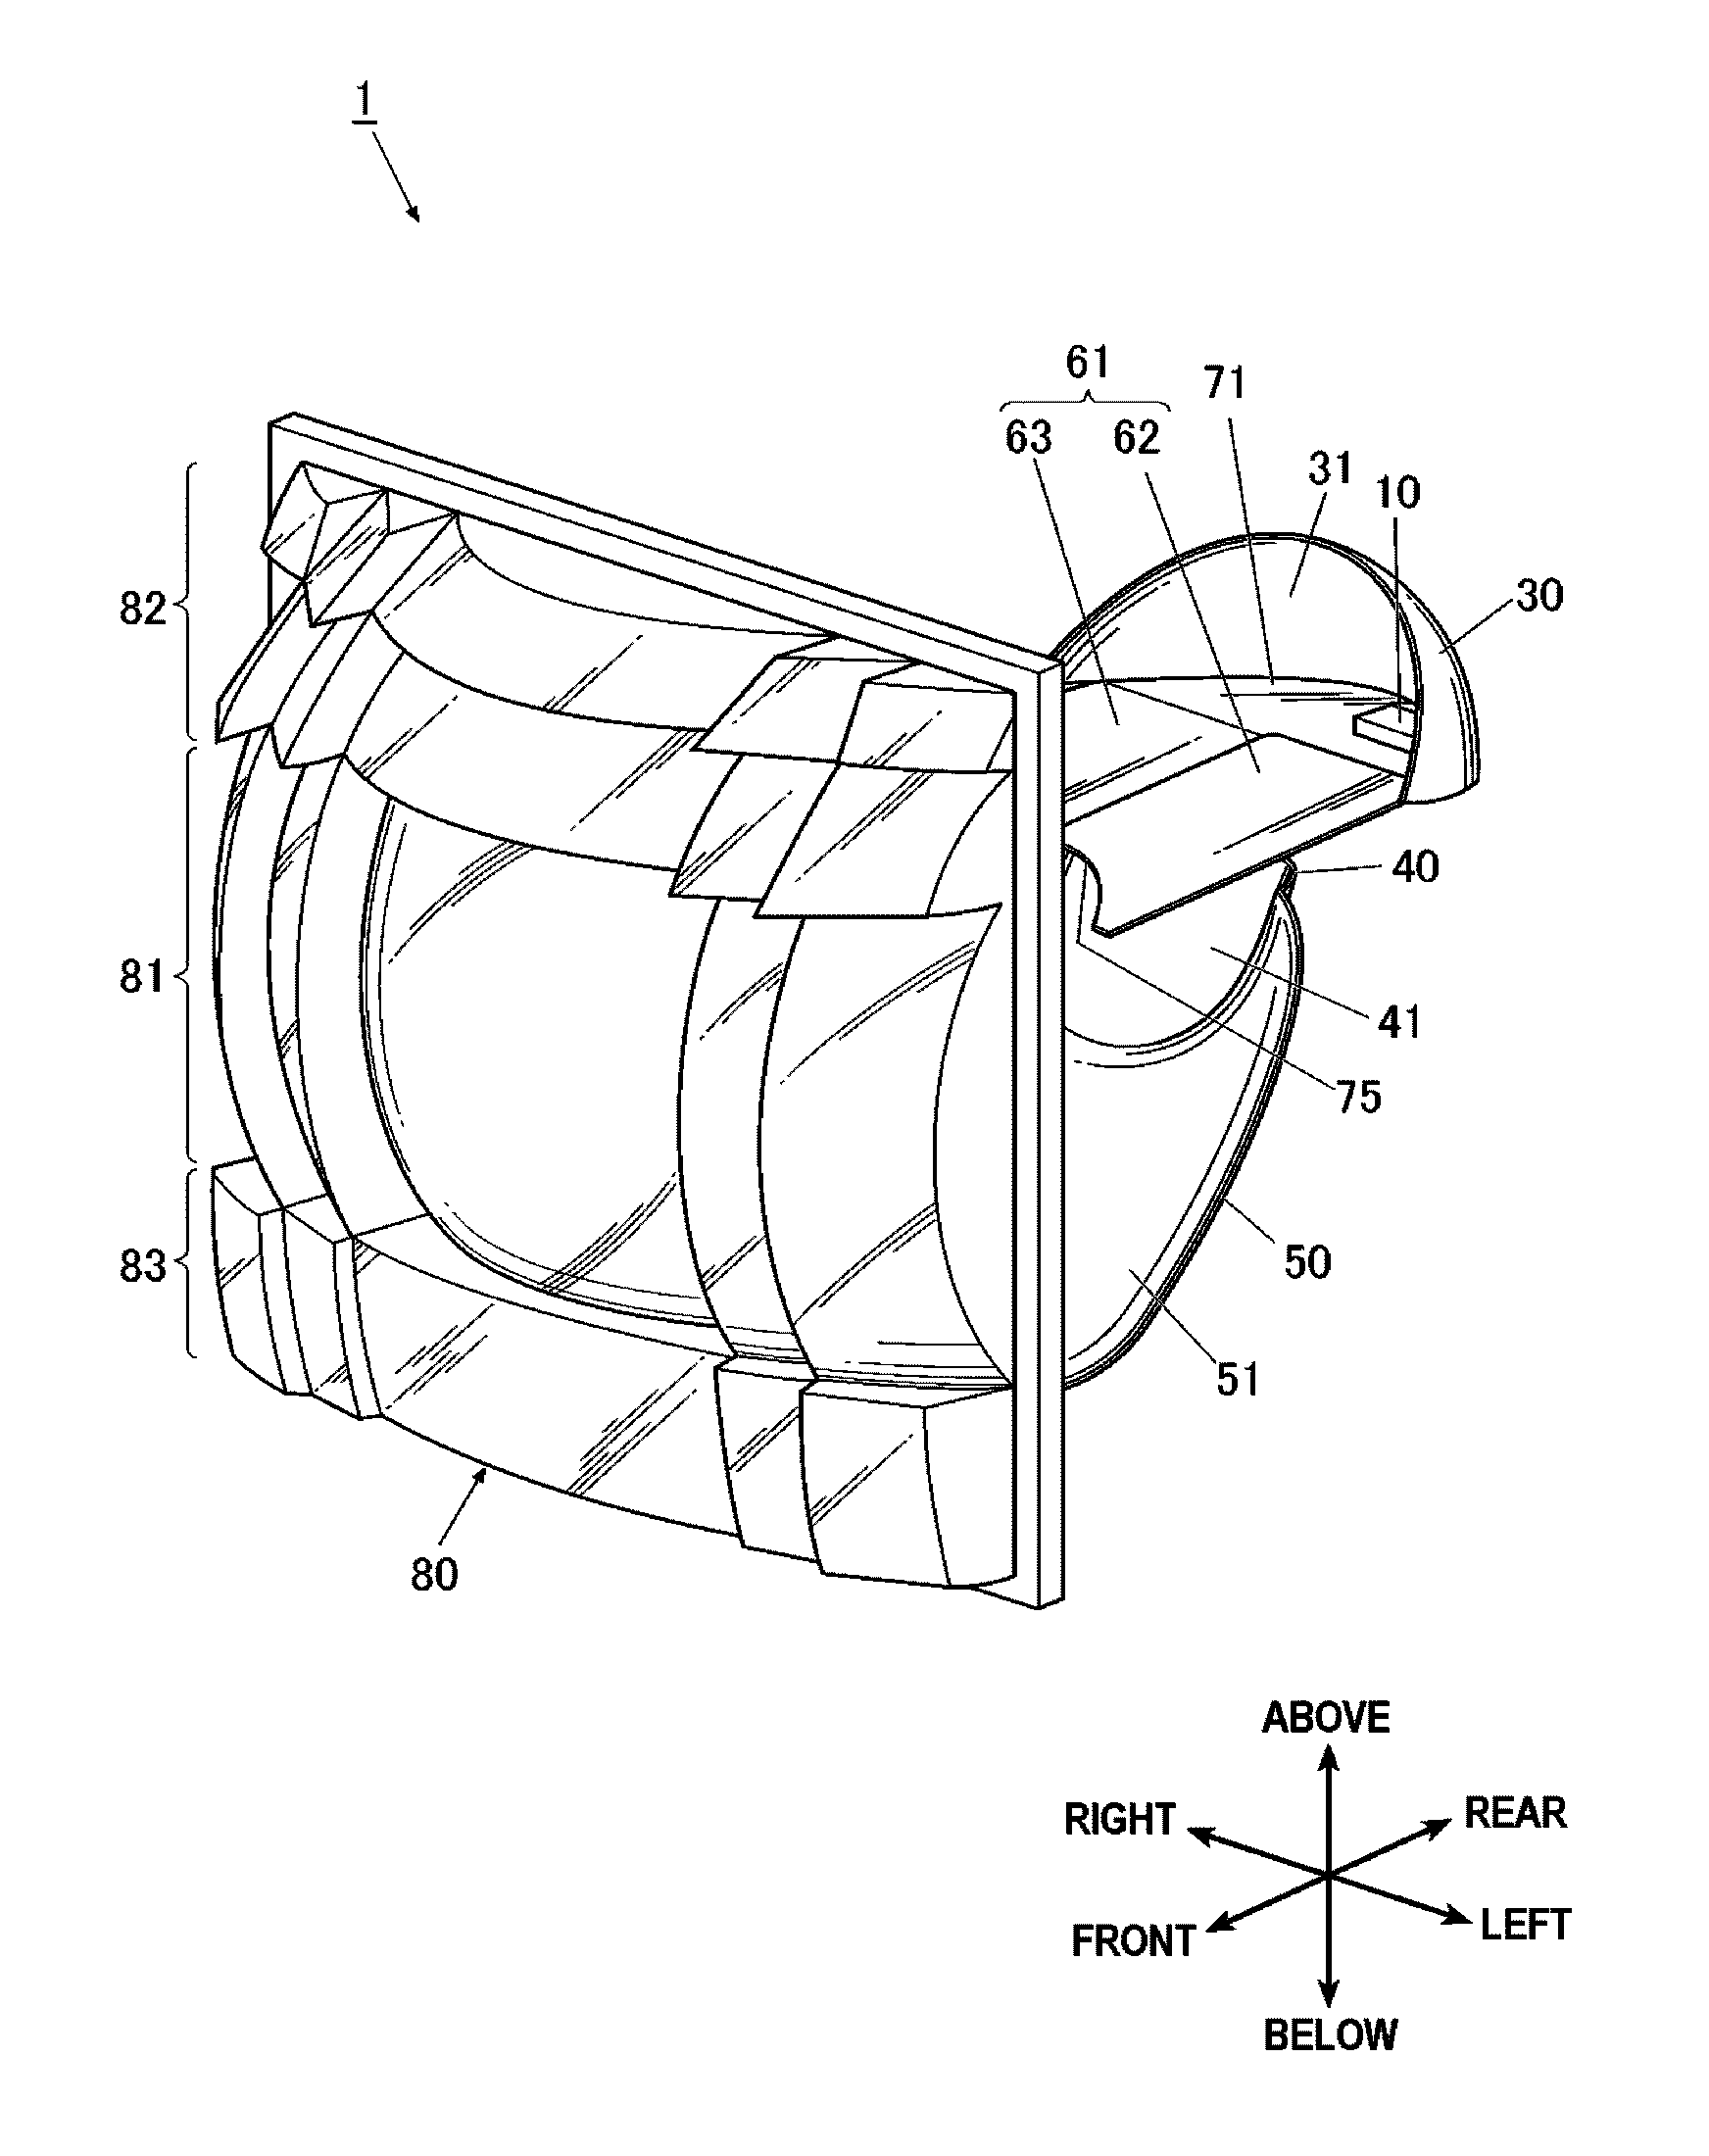 Vehicle light and multi-focal lens